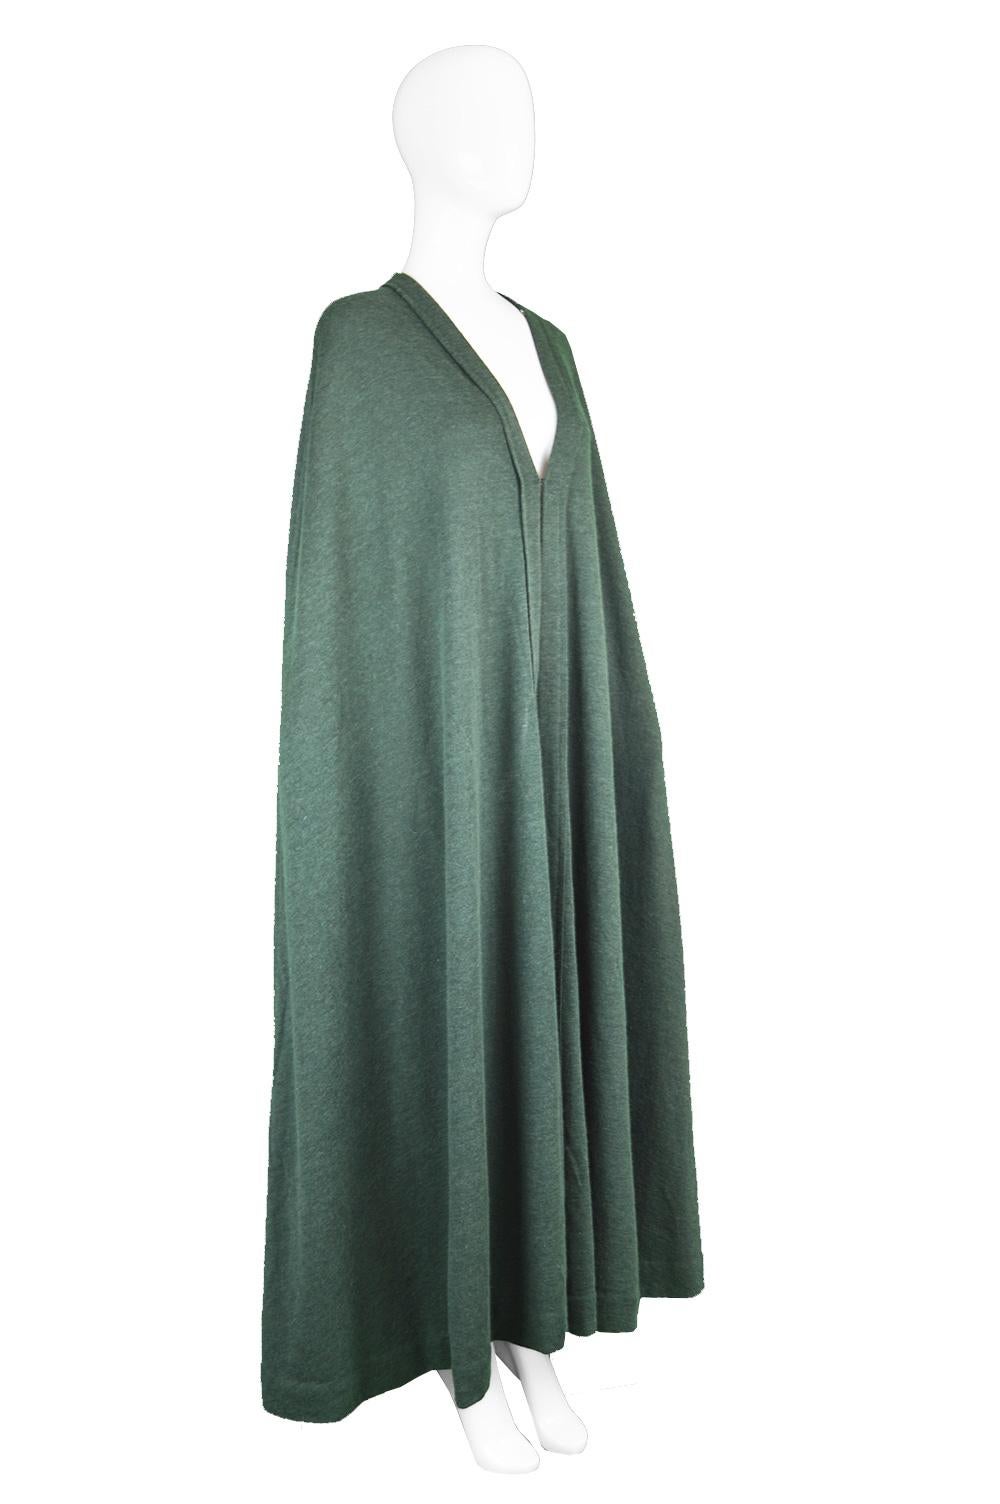 Lanvin Haute Couture Unstructured Green Wool Knit Maxi Cape Cloak, 1970s In Excellent Condition For Sale In Doncaster, South Yorkshire